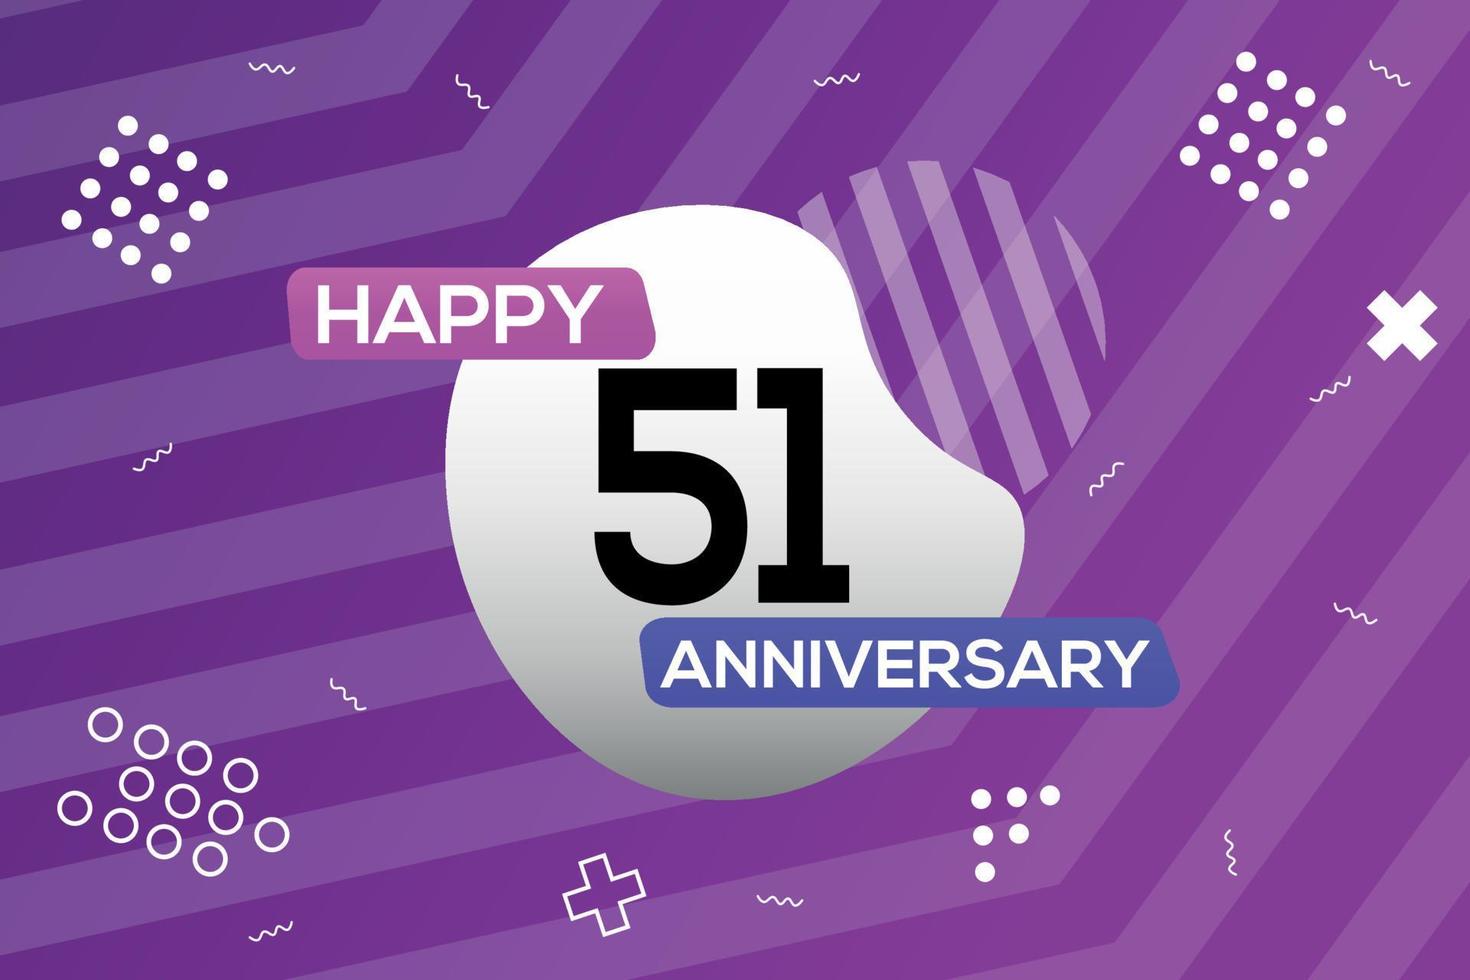 51st year anniversary logo vector design anniversary celebration with colorful geometric shapes abstract illustration